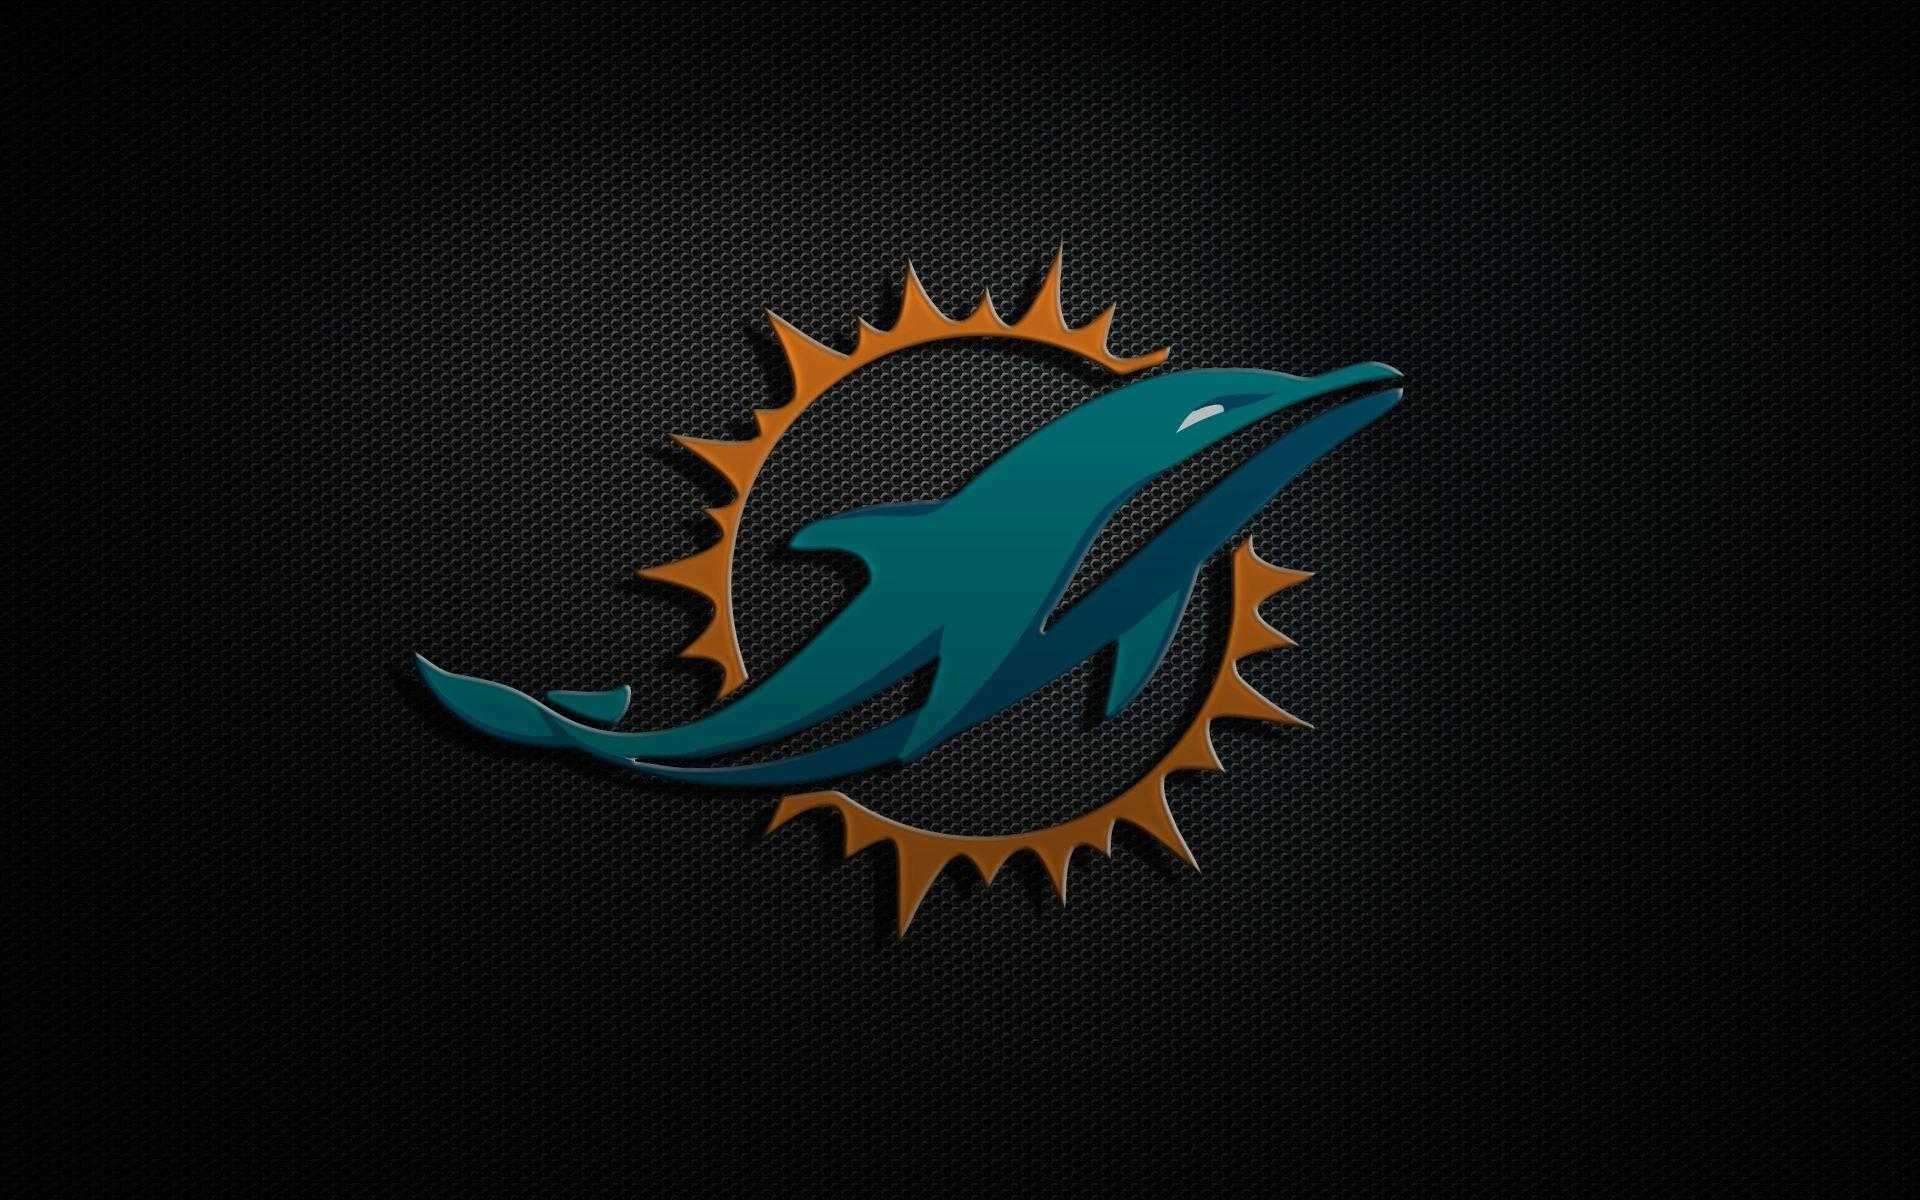 10 Most Popular Miami Dolphins Desktop Wallpapers FULL HD 1920×1080 For PC Background